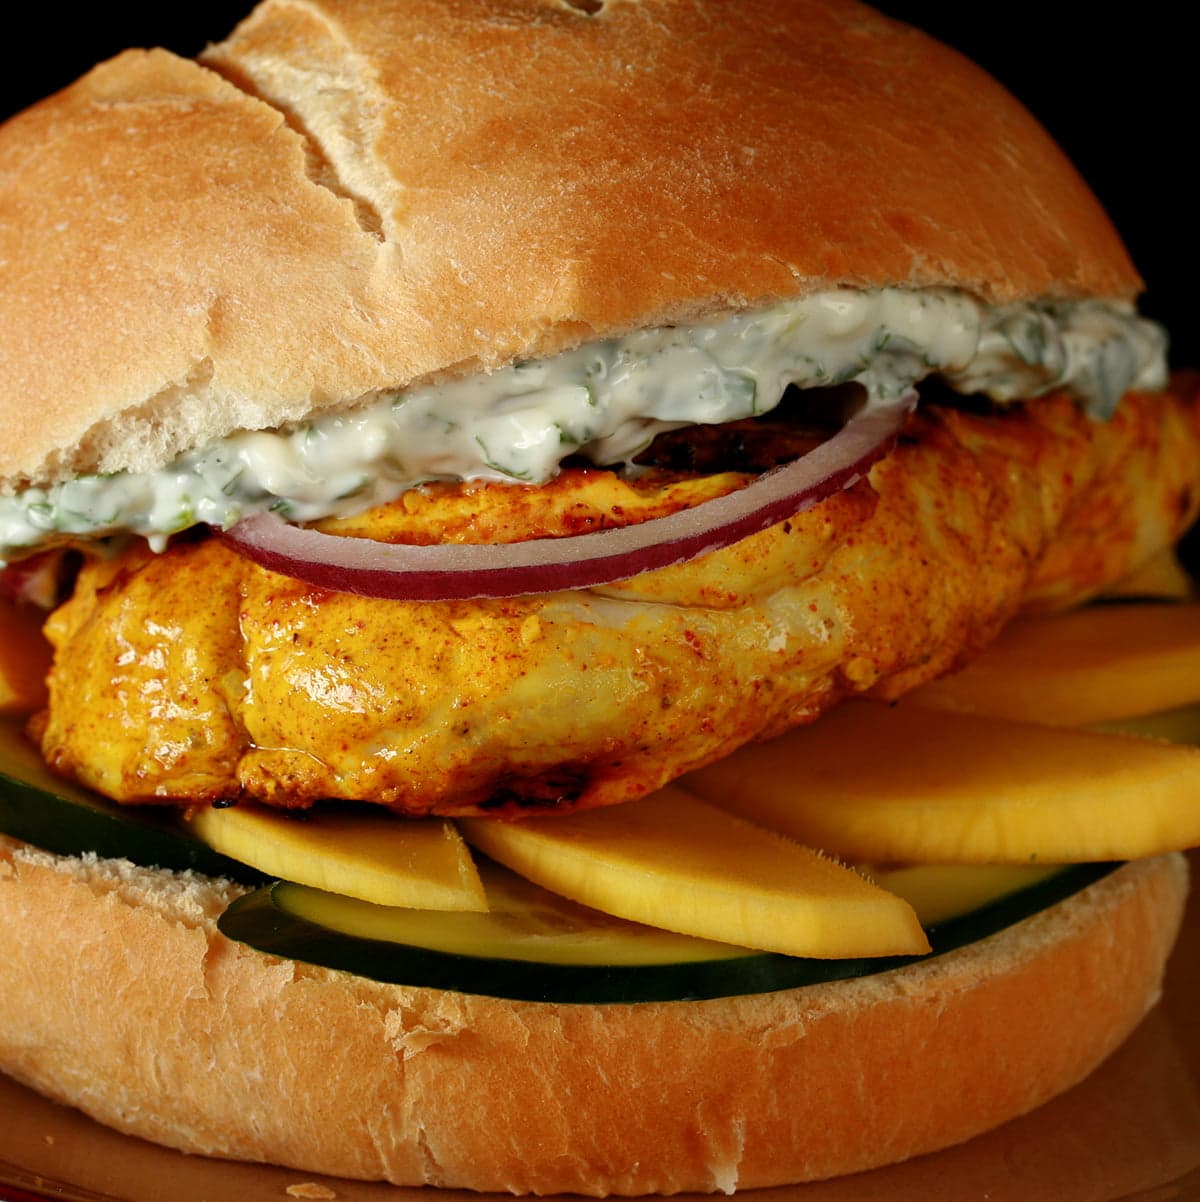 Tandoori Marinated chicken breast with cucumbers, mango, red onions, and a cilantro mint mayo, on a bun.